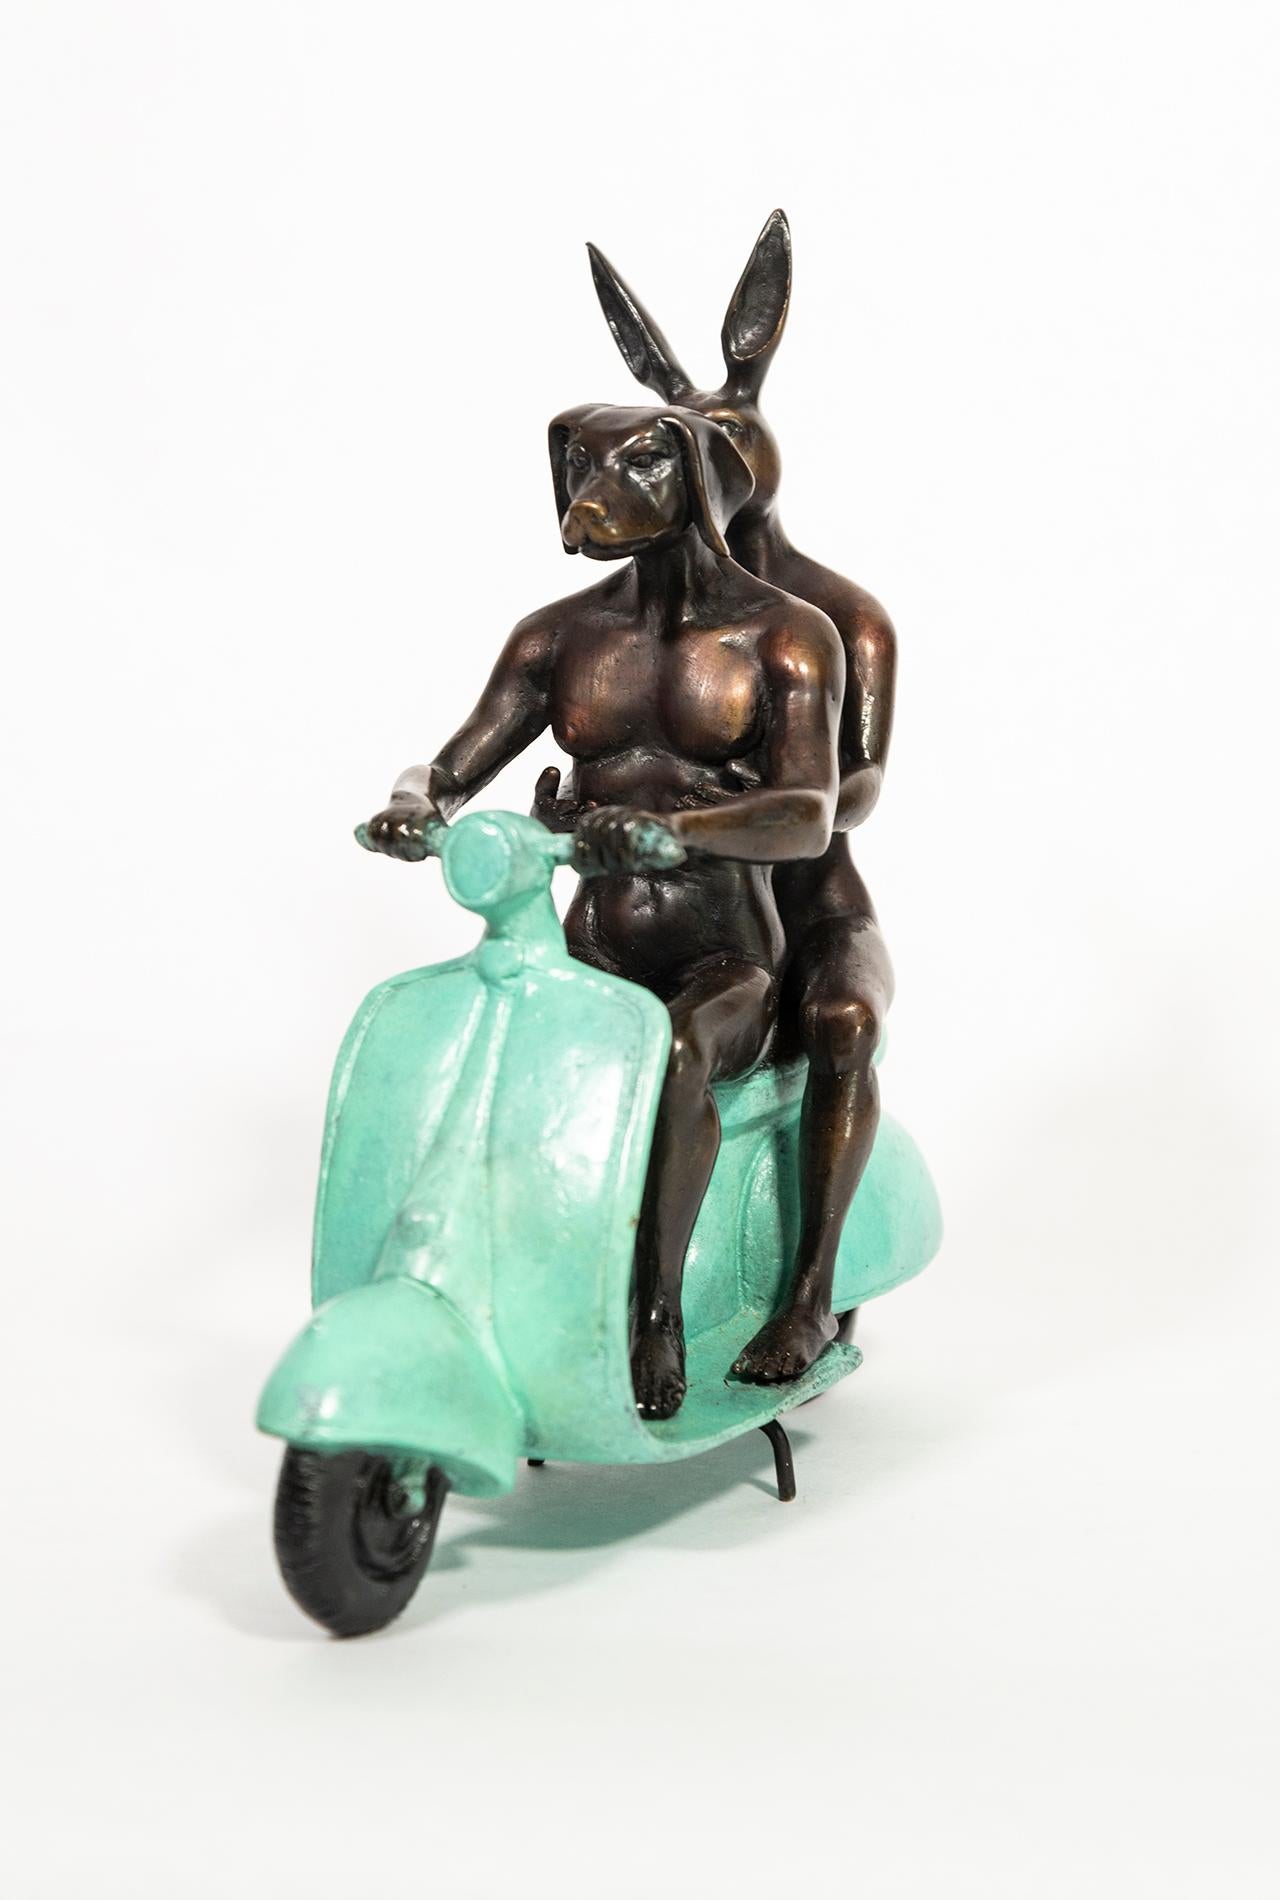 They were authentic Vespa riders in Rome 65/100 - figurative, bronze sculpture - Contemporary Sculpture by Gillie and Marc Schattner